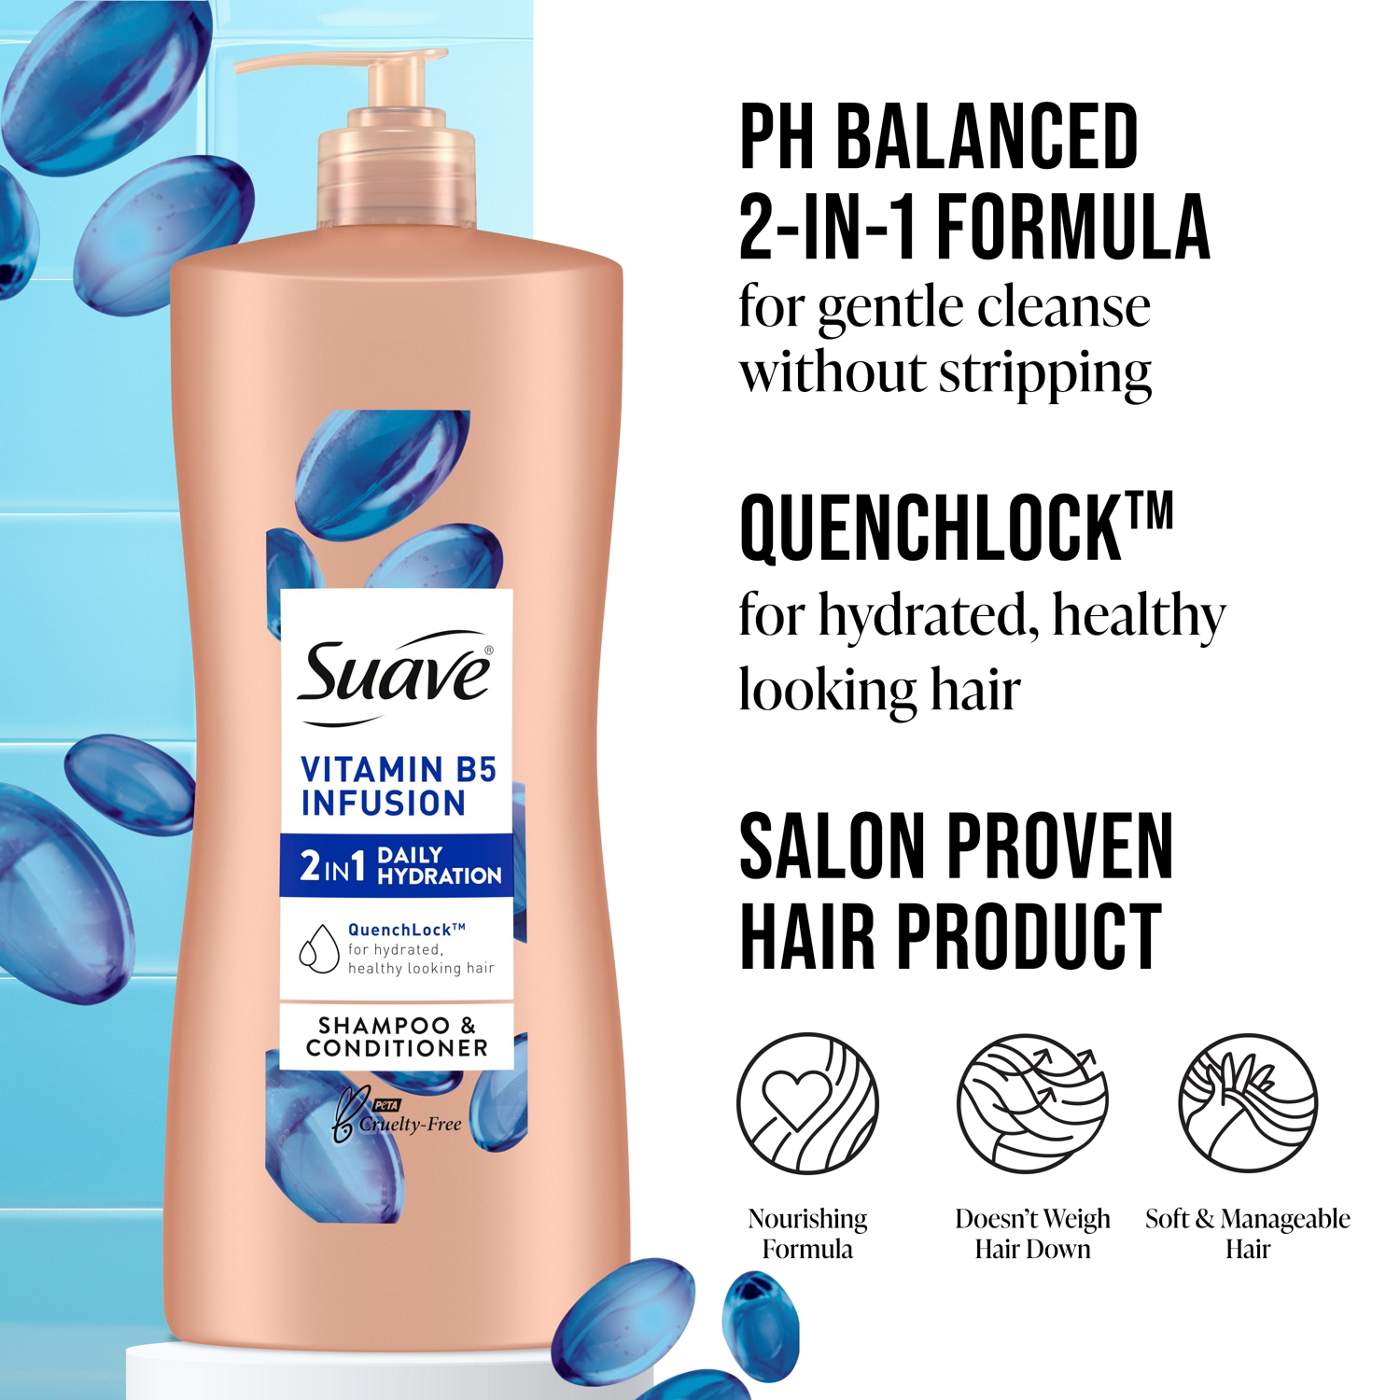 Suave Vitamin B5 Infusion 2 In 1 Daily Hydration Shampoo & Conditioner; image 2 of 4